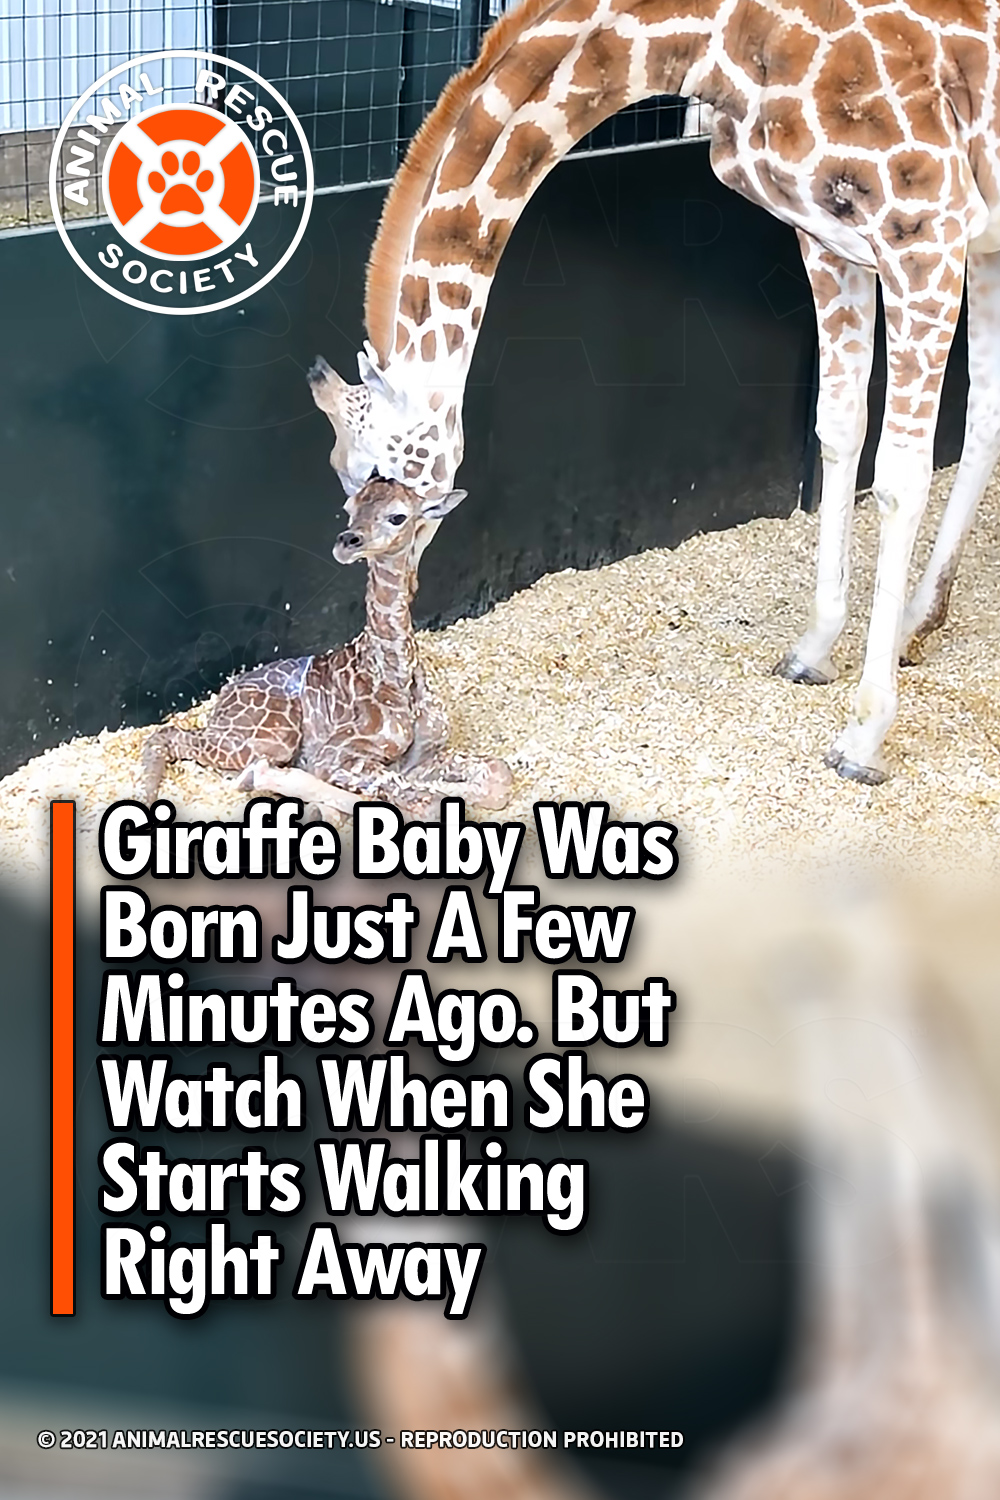 Giraffe Baby Was Born Just A Few Minutes Ago. But Watch When She Starts Walking Right Away